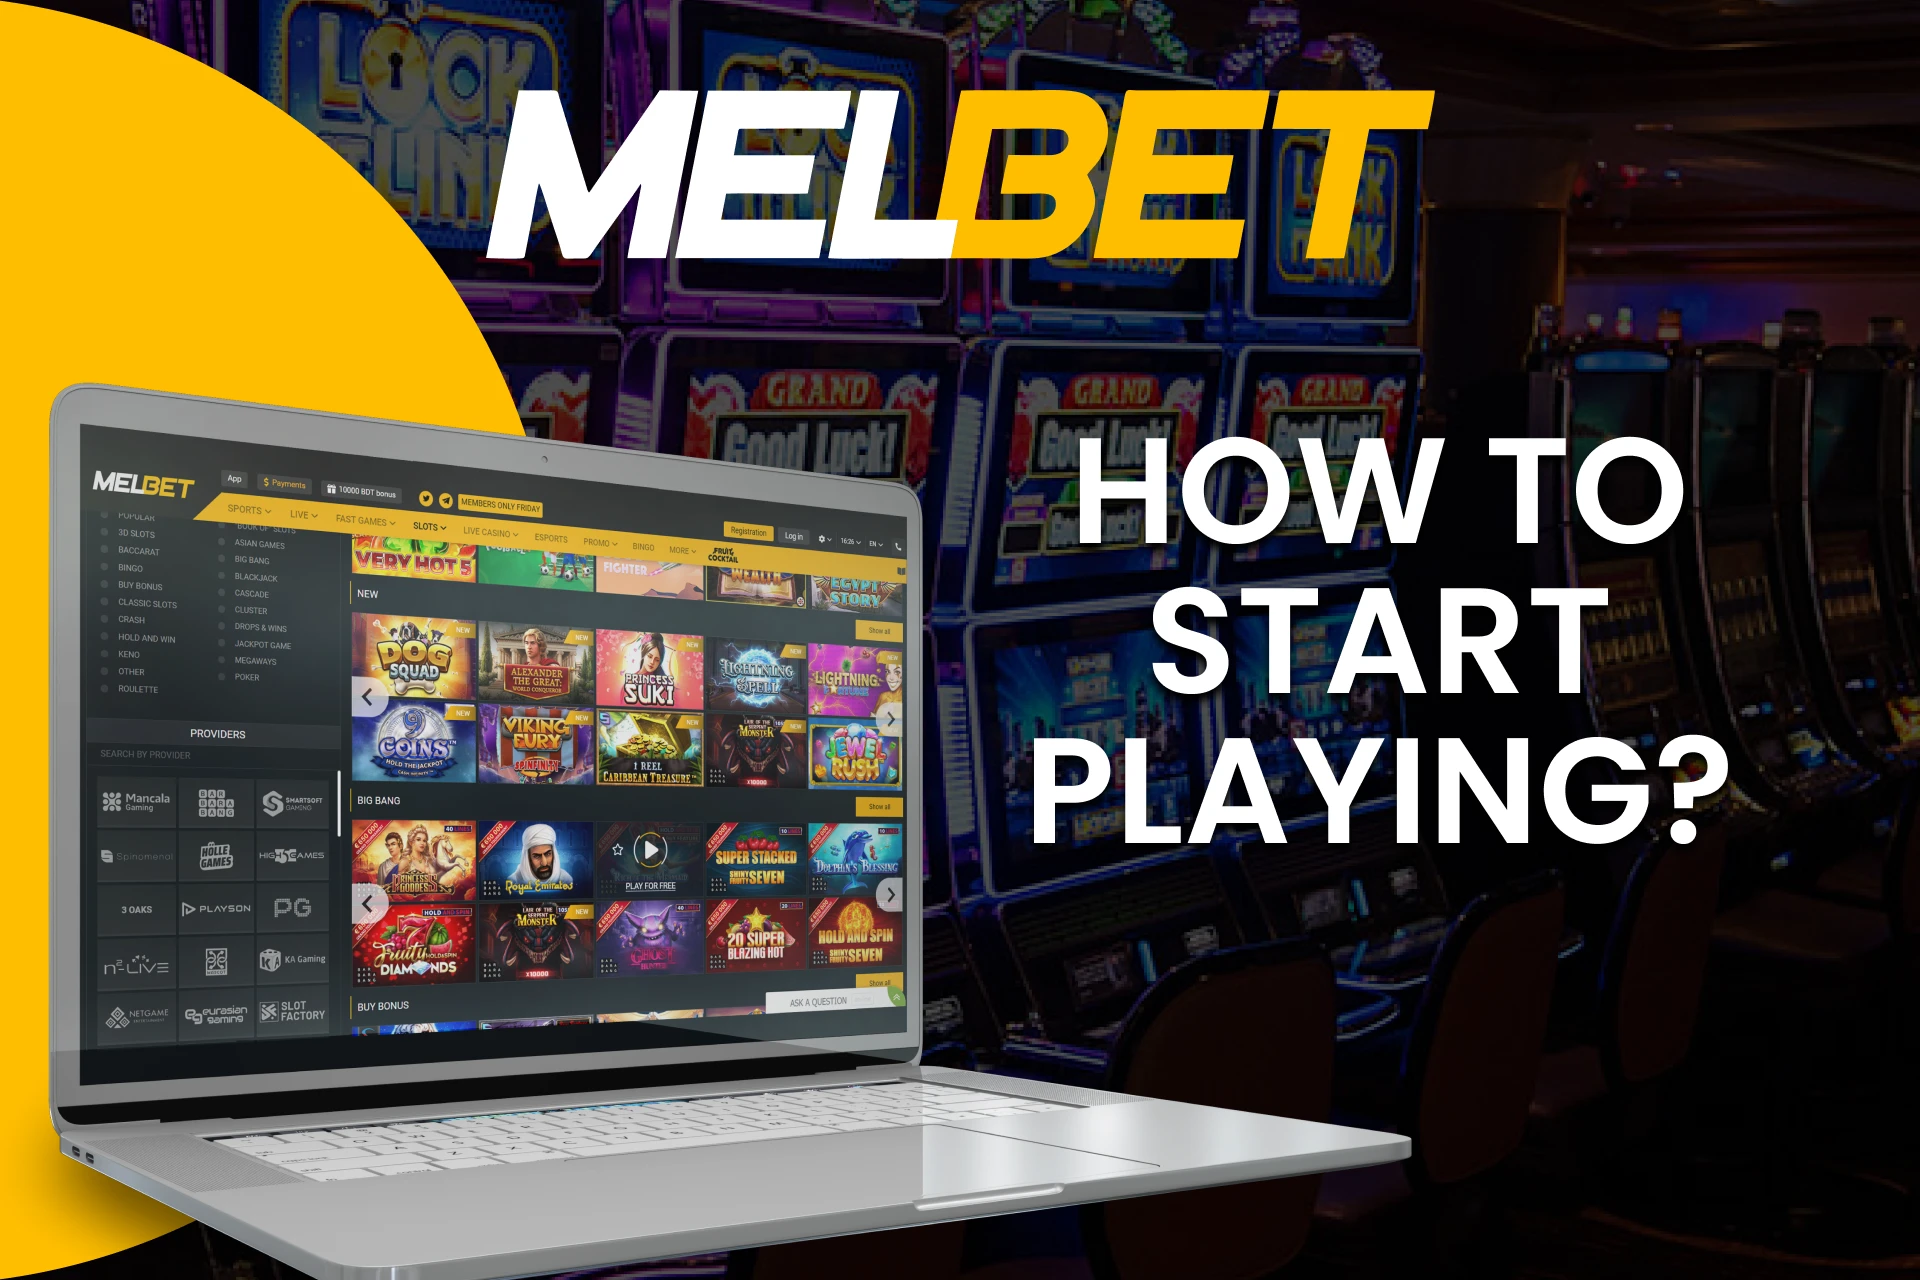 Go to the right Melbet section to play Slots.